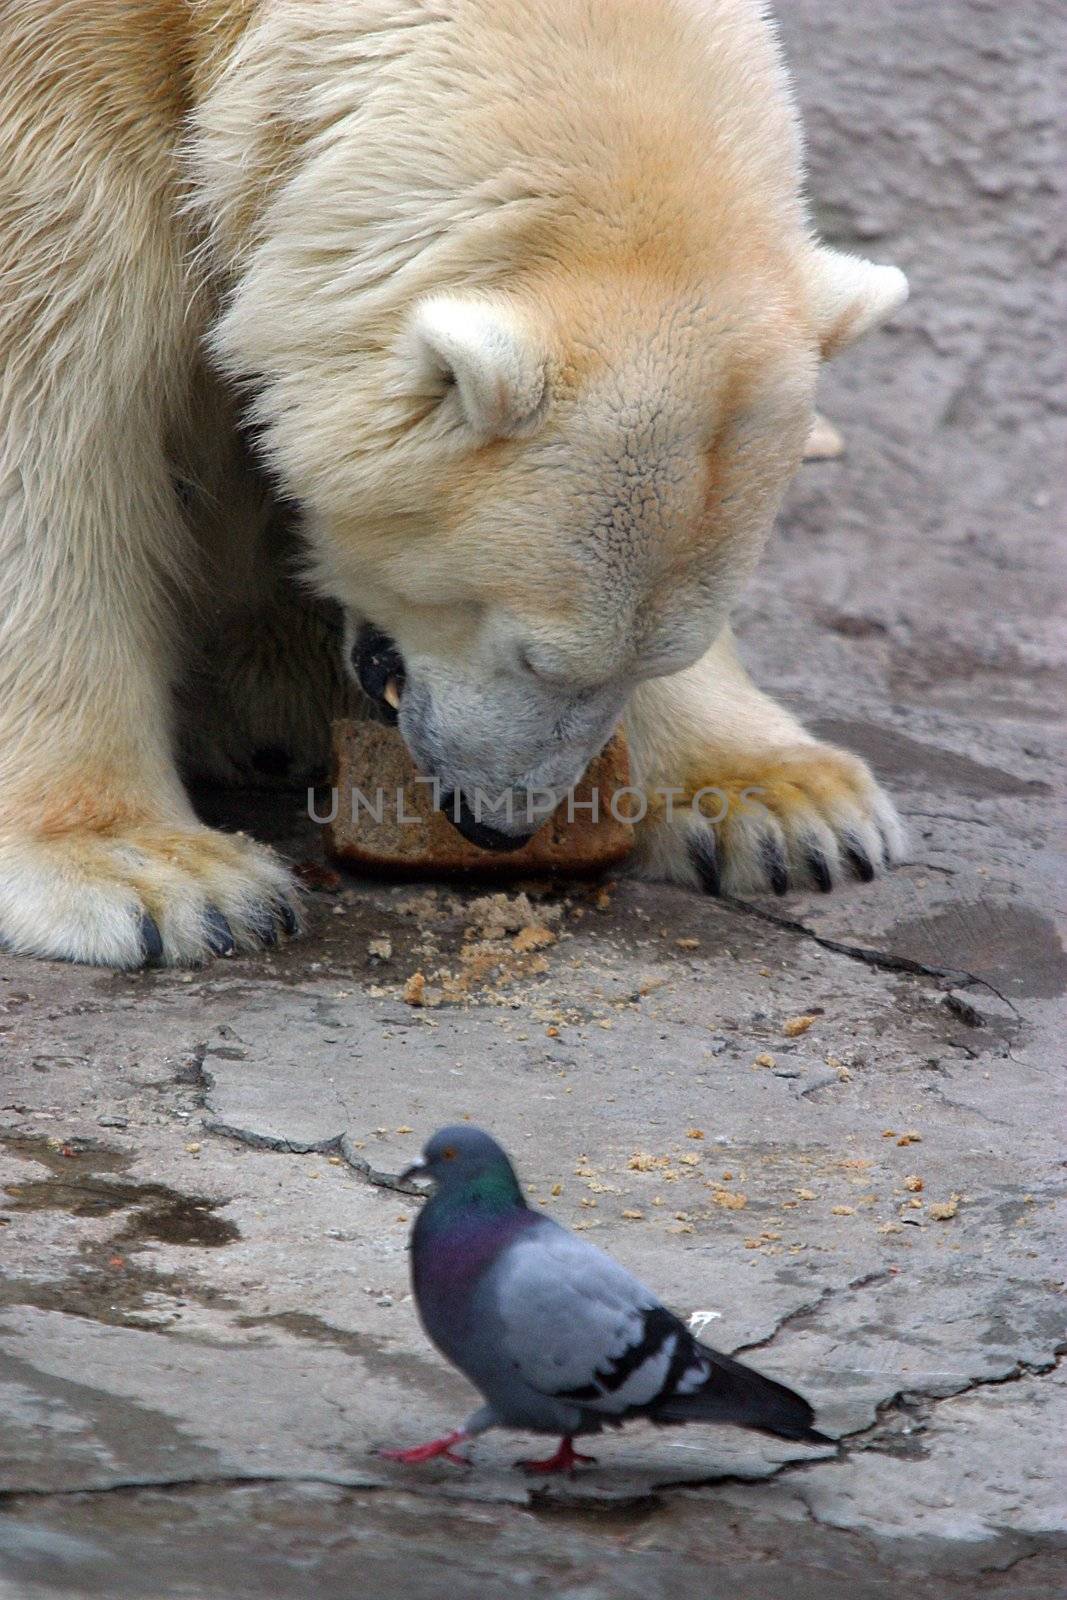 Bear and pigeon by friday